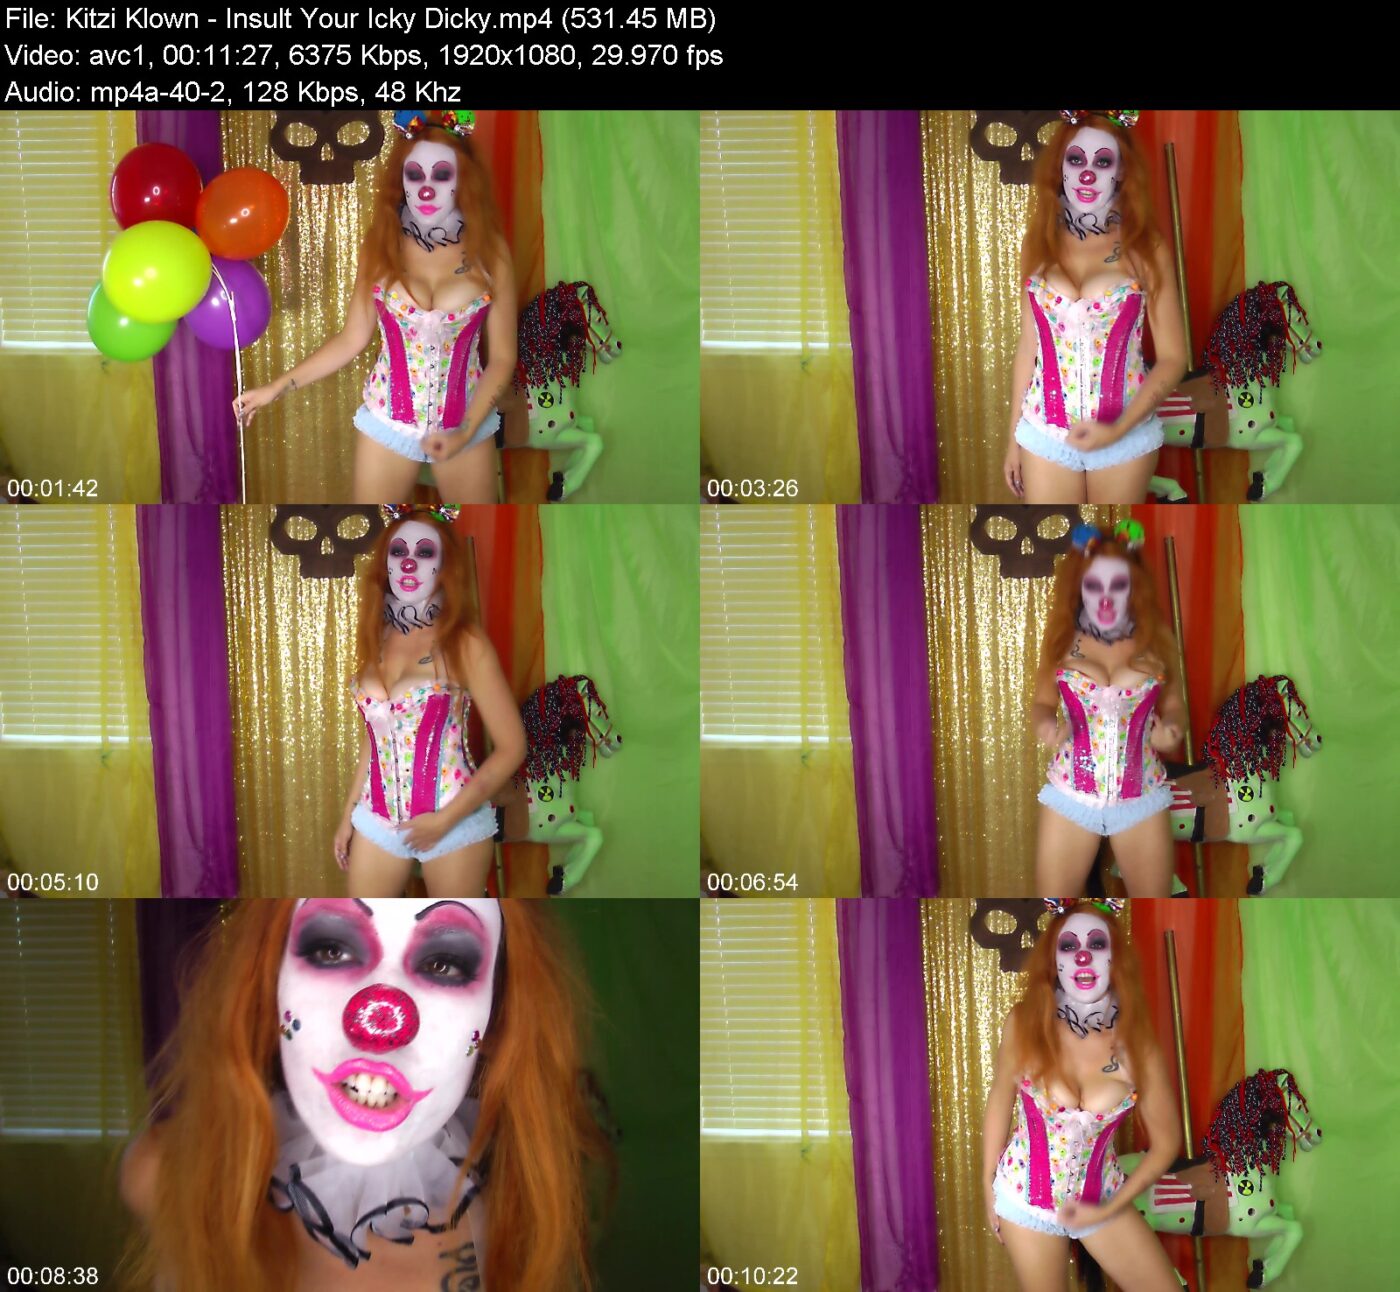 Kitzi Klown in Insult Your Icky Dicky